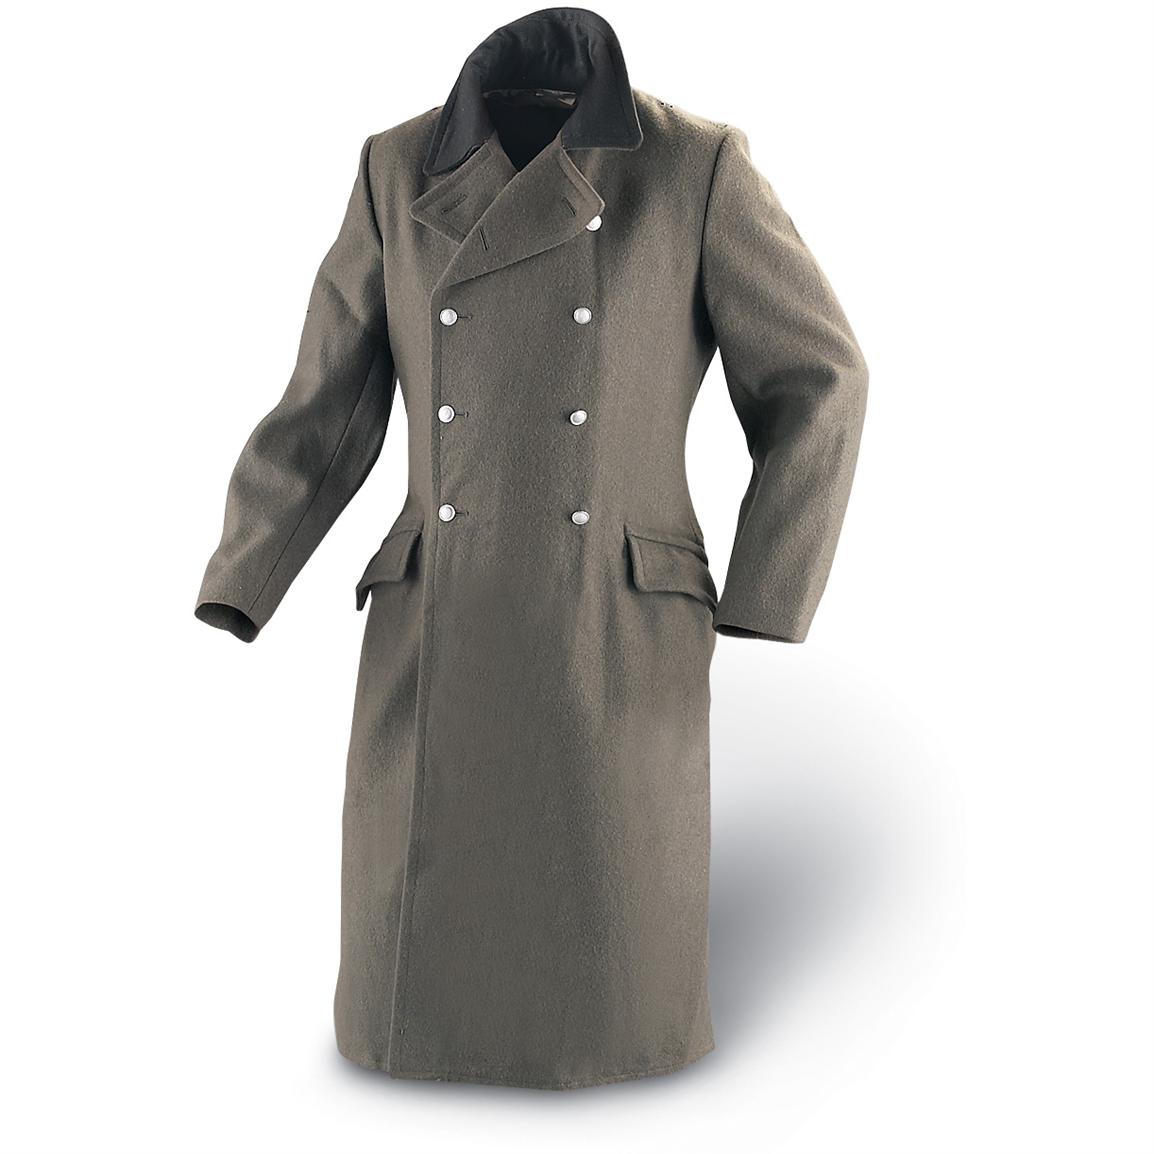 Used E. German Wool Coat - 81440, Insulated Military Jackets at ...